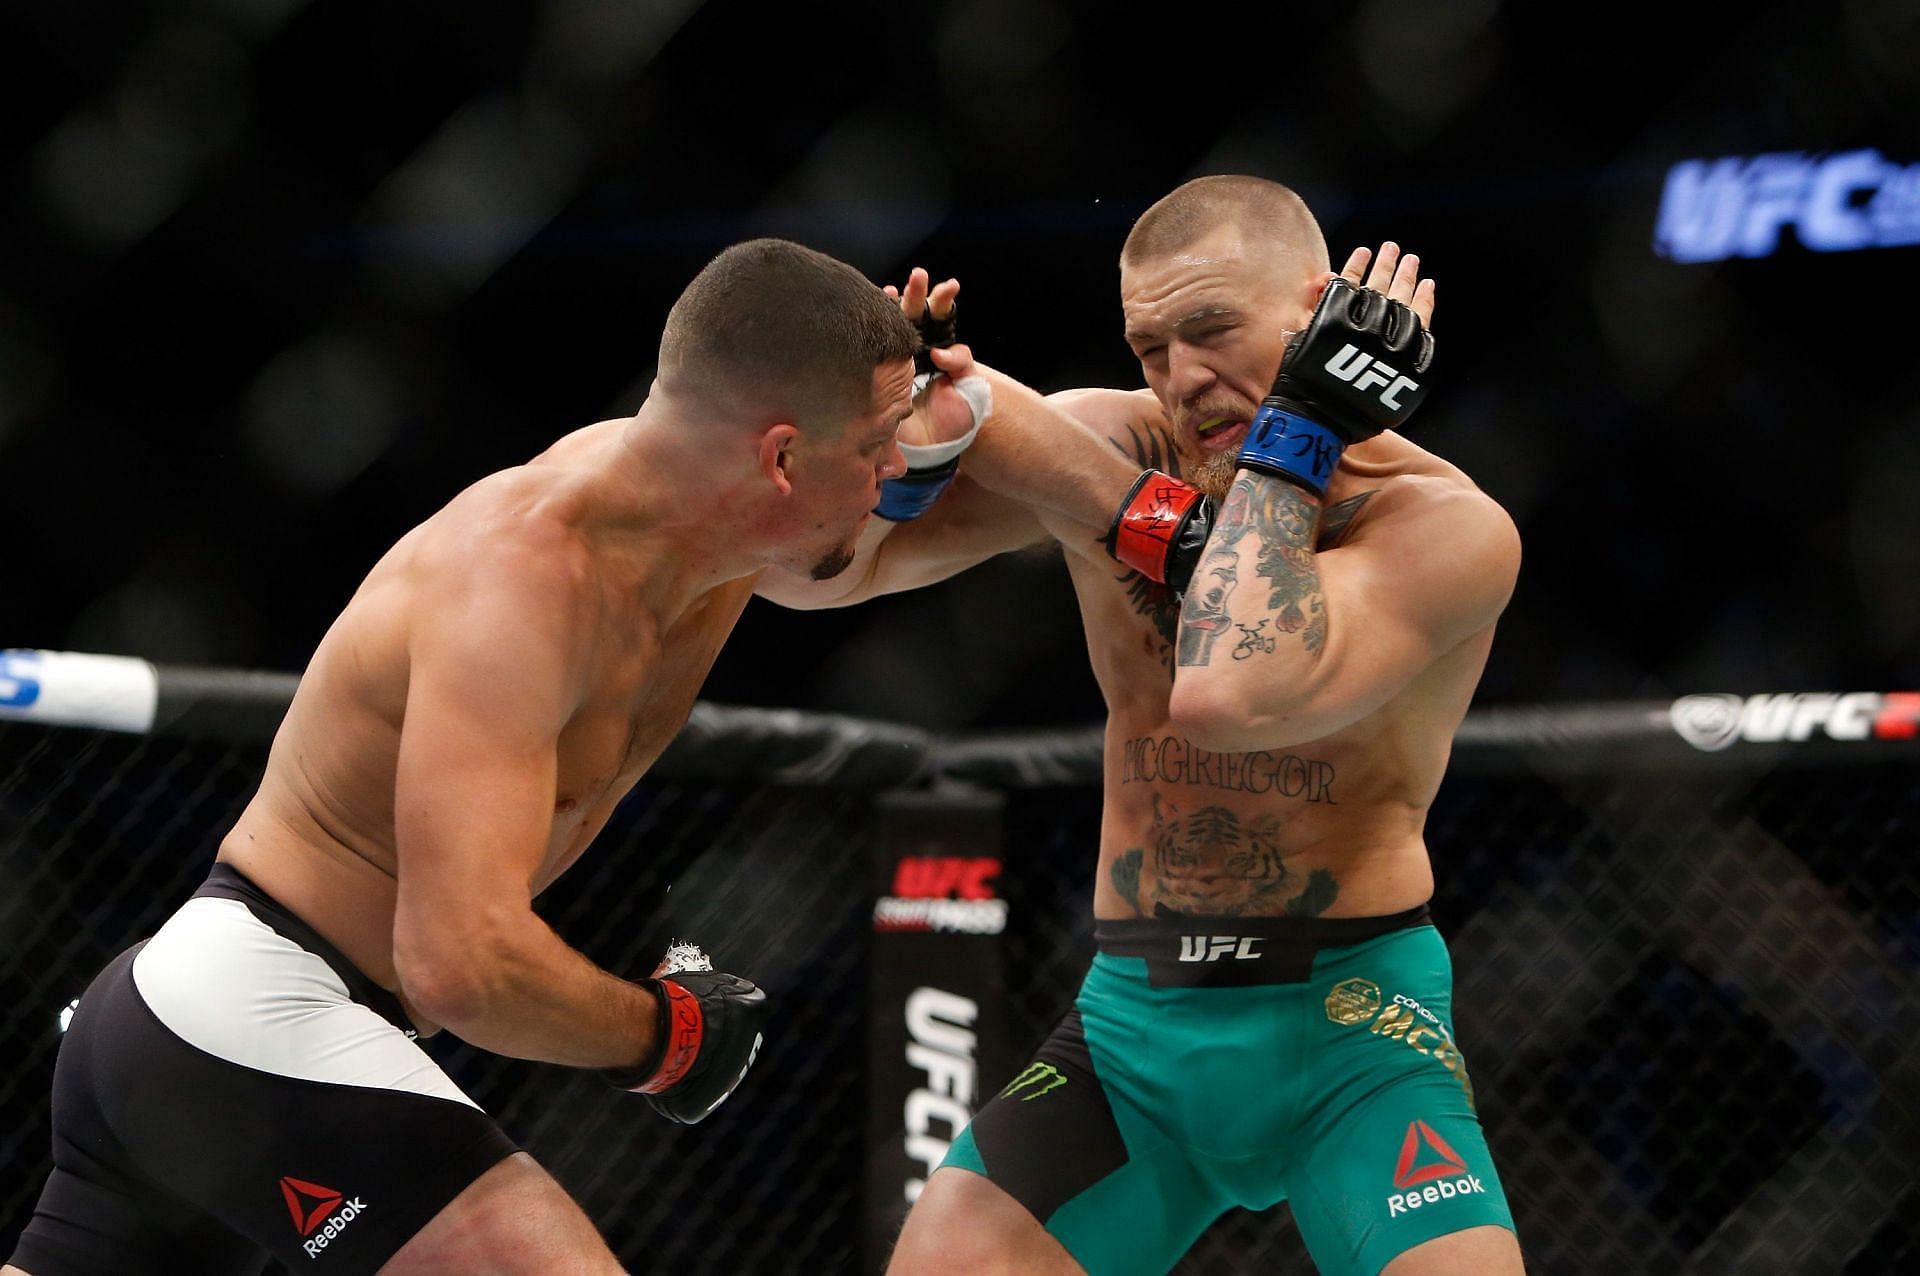 Nate Diaz and Conor McGregor went to war at UFC 196 and UFC 202.